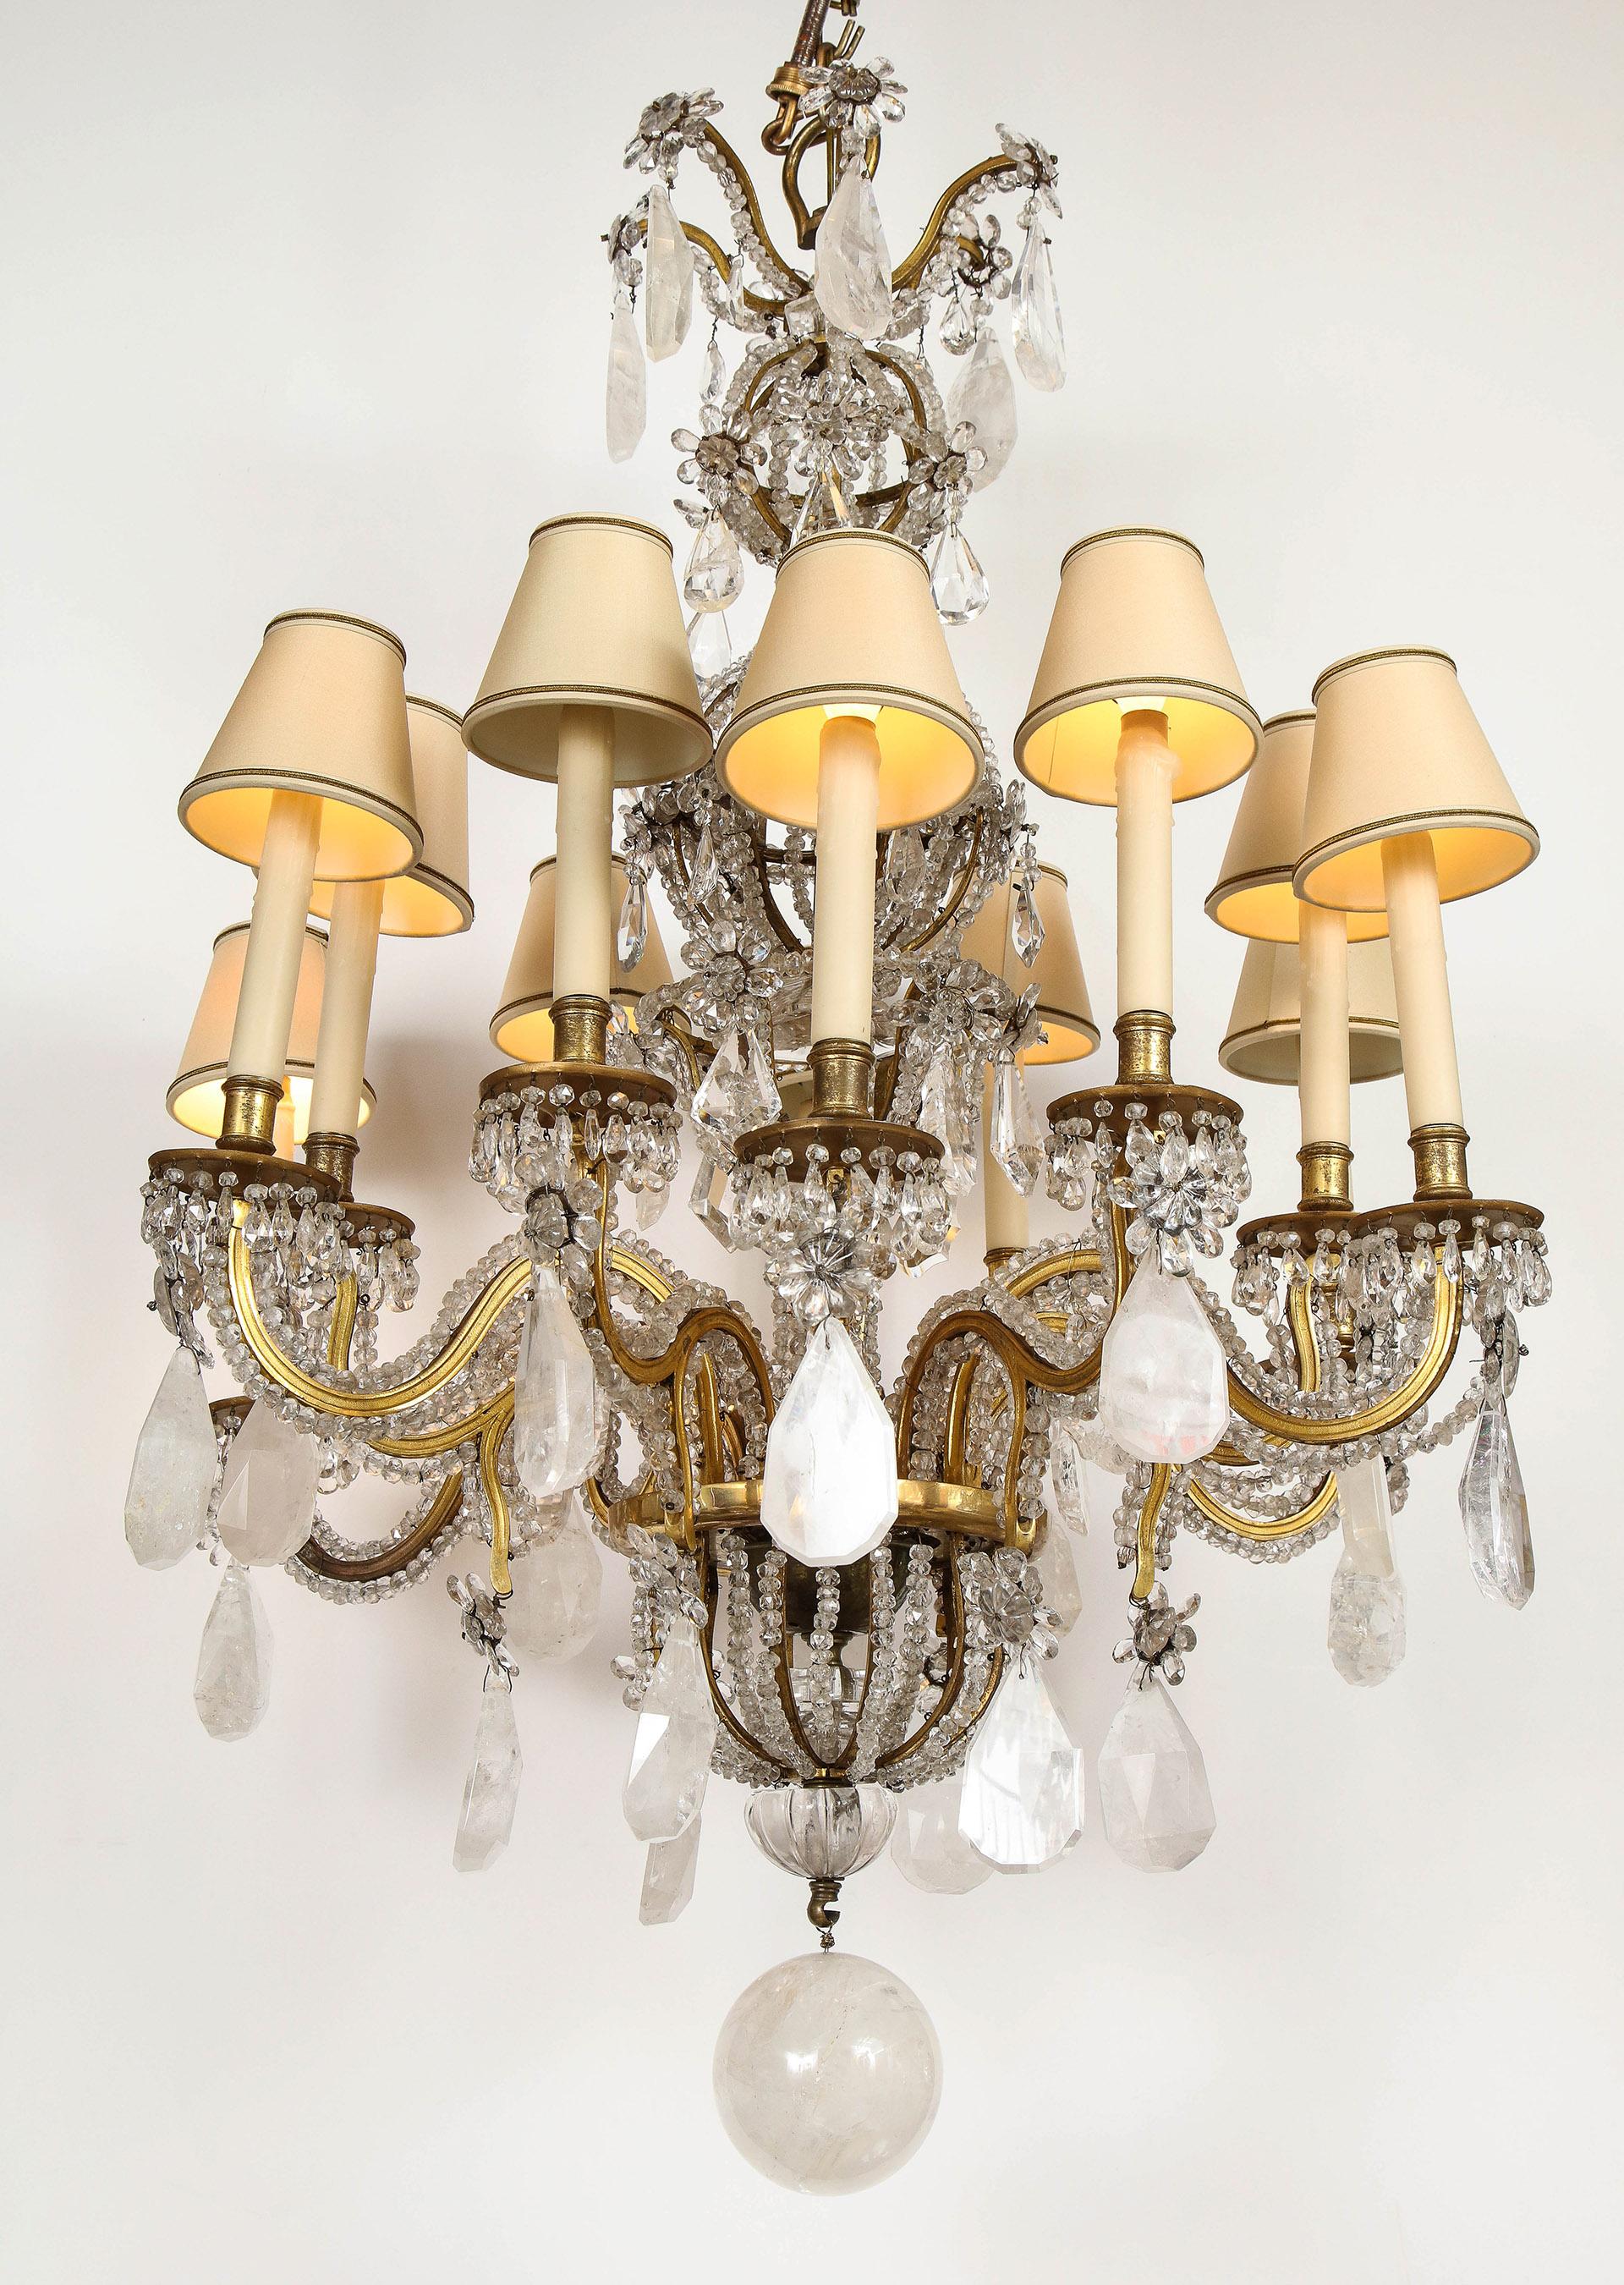 Grand scale rock crystal and doré bronze chandelier by Maison Baguès

A rare rock crystal chandelier by Maison Baguès in the Louis XV style, having 12 candle lights with an electrified interior crystal cage. The doré bronze frame decorated with